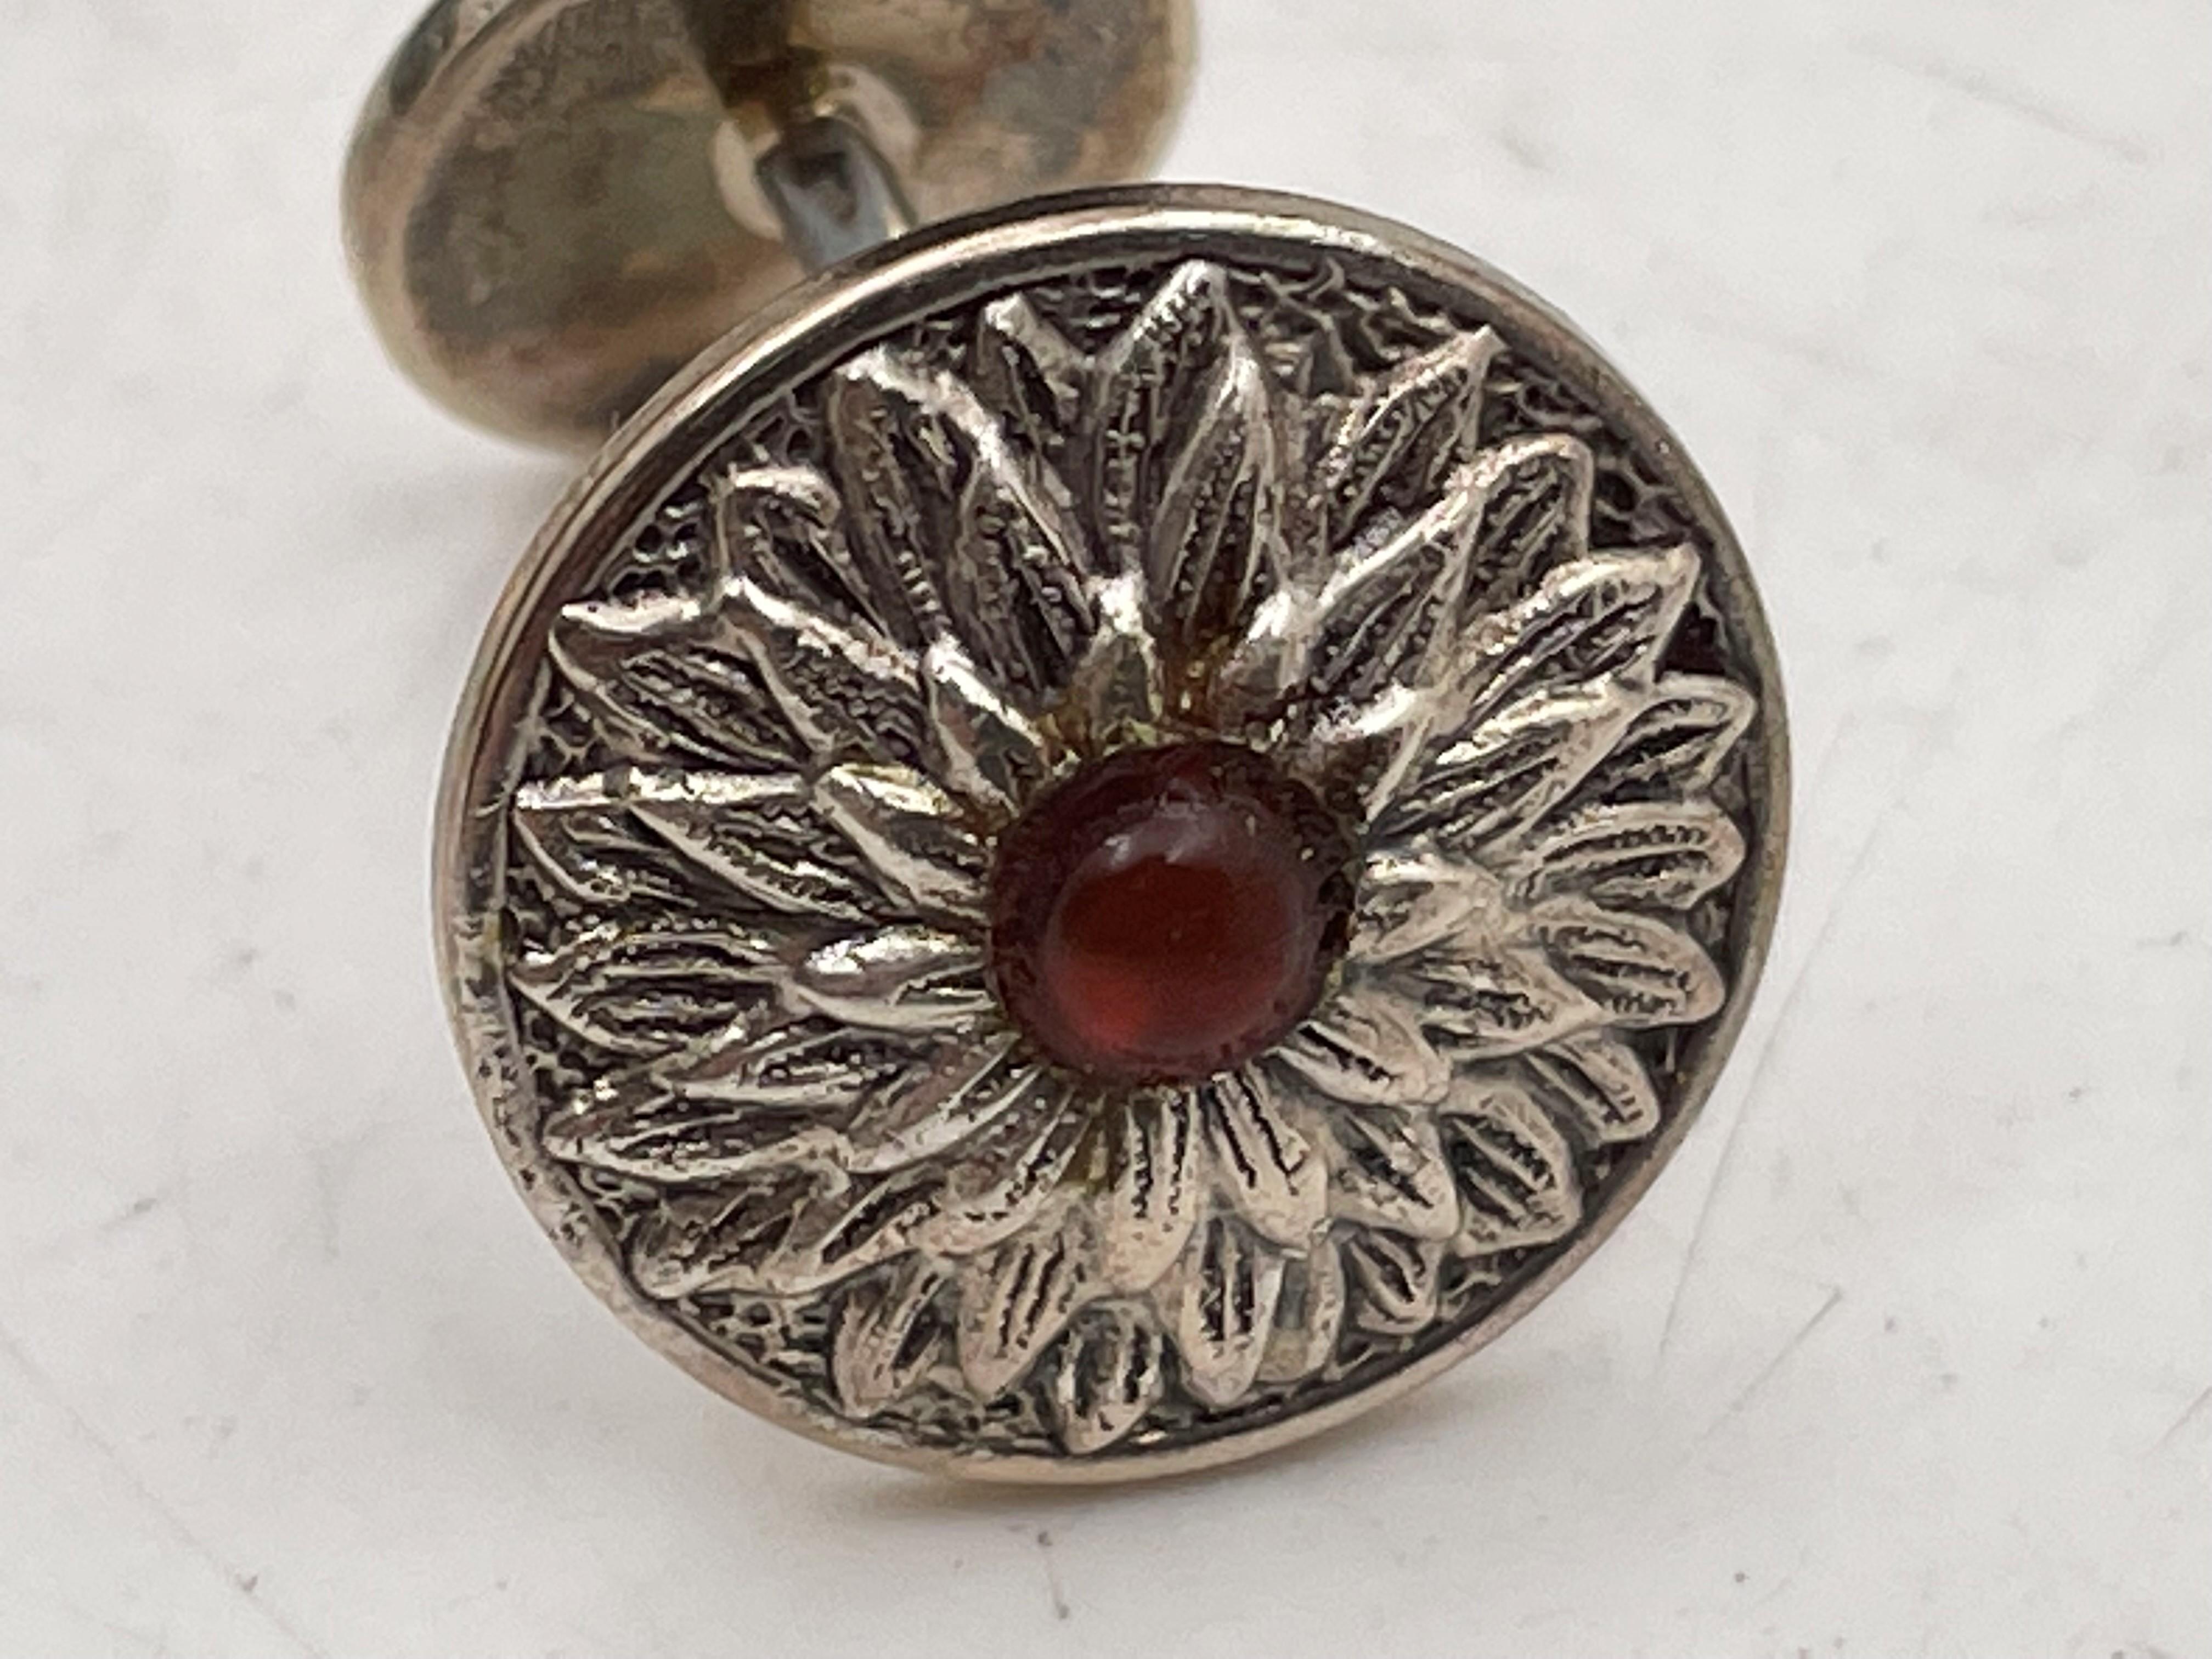 Gianmaria Buccellati, Italian, pair of sterling silver cufflinks, shaped as a sunflower, with a red stone at the center, in a beautiful floral motif, measuring 2/3'' in diameter, and bearing hallmarks. Sold in its original box, never used.

Mario